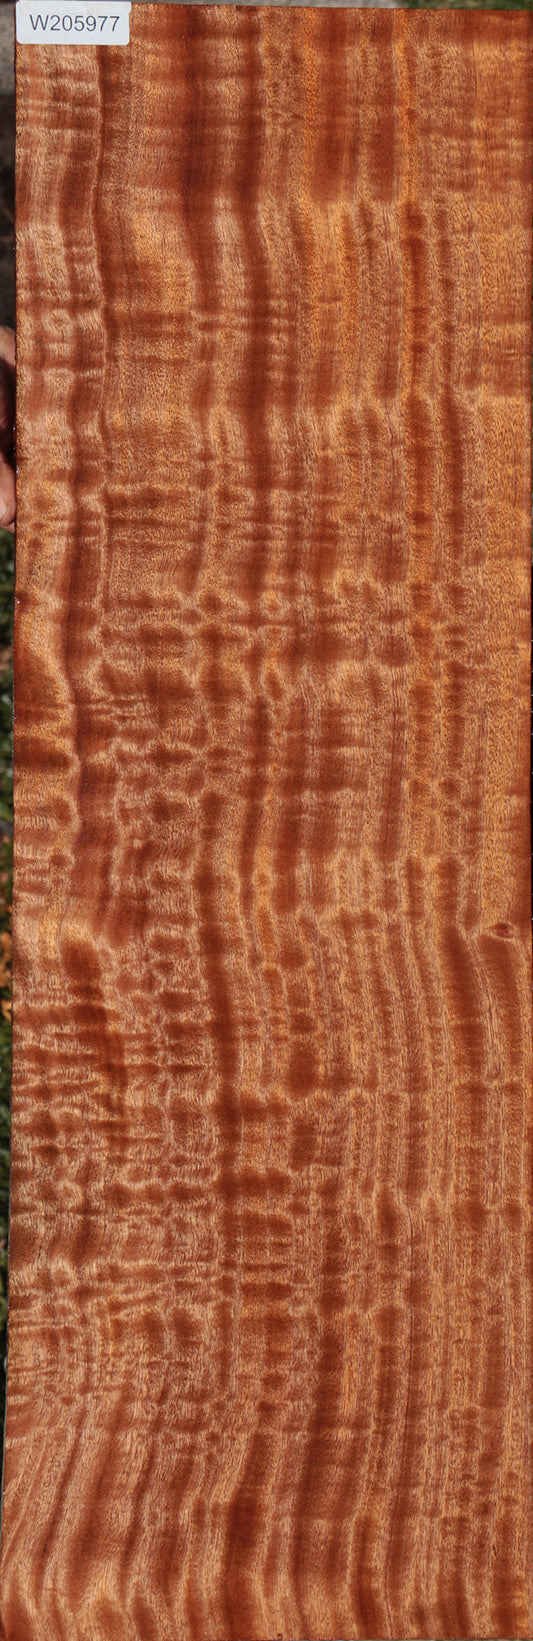 Extra Fancy Quilted Sapele Lumber